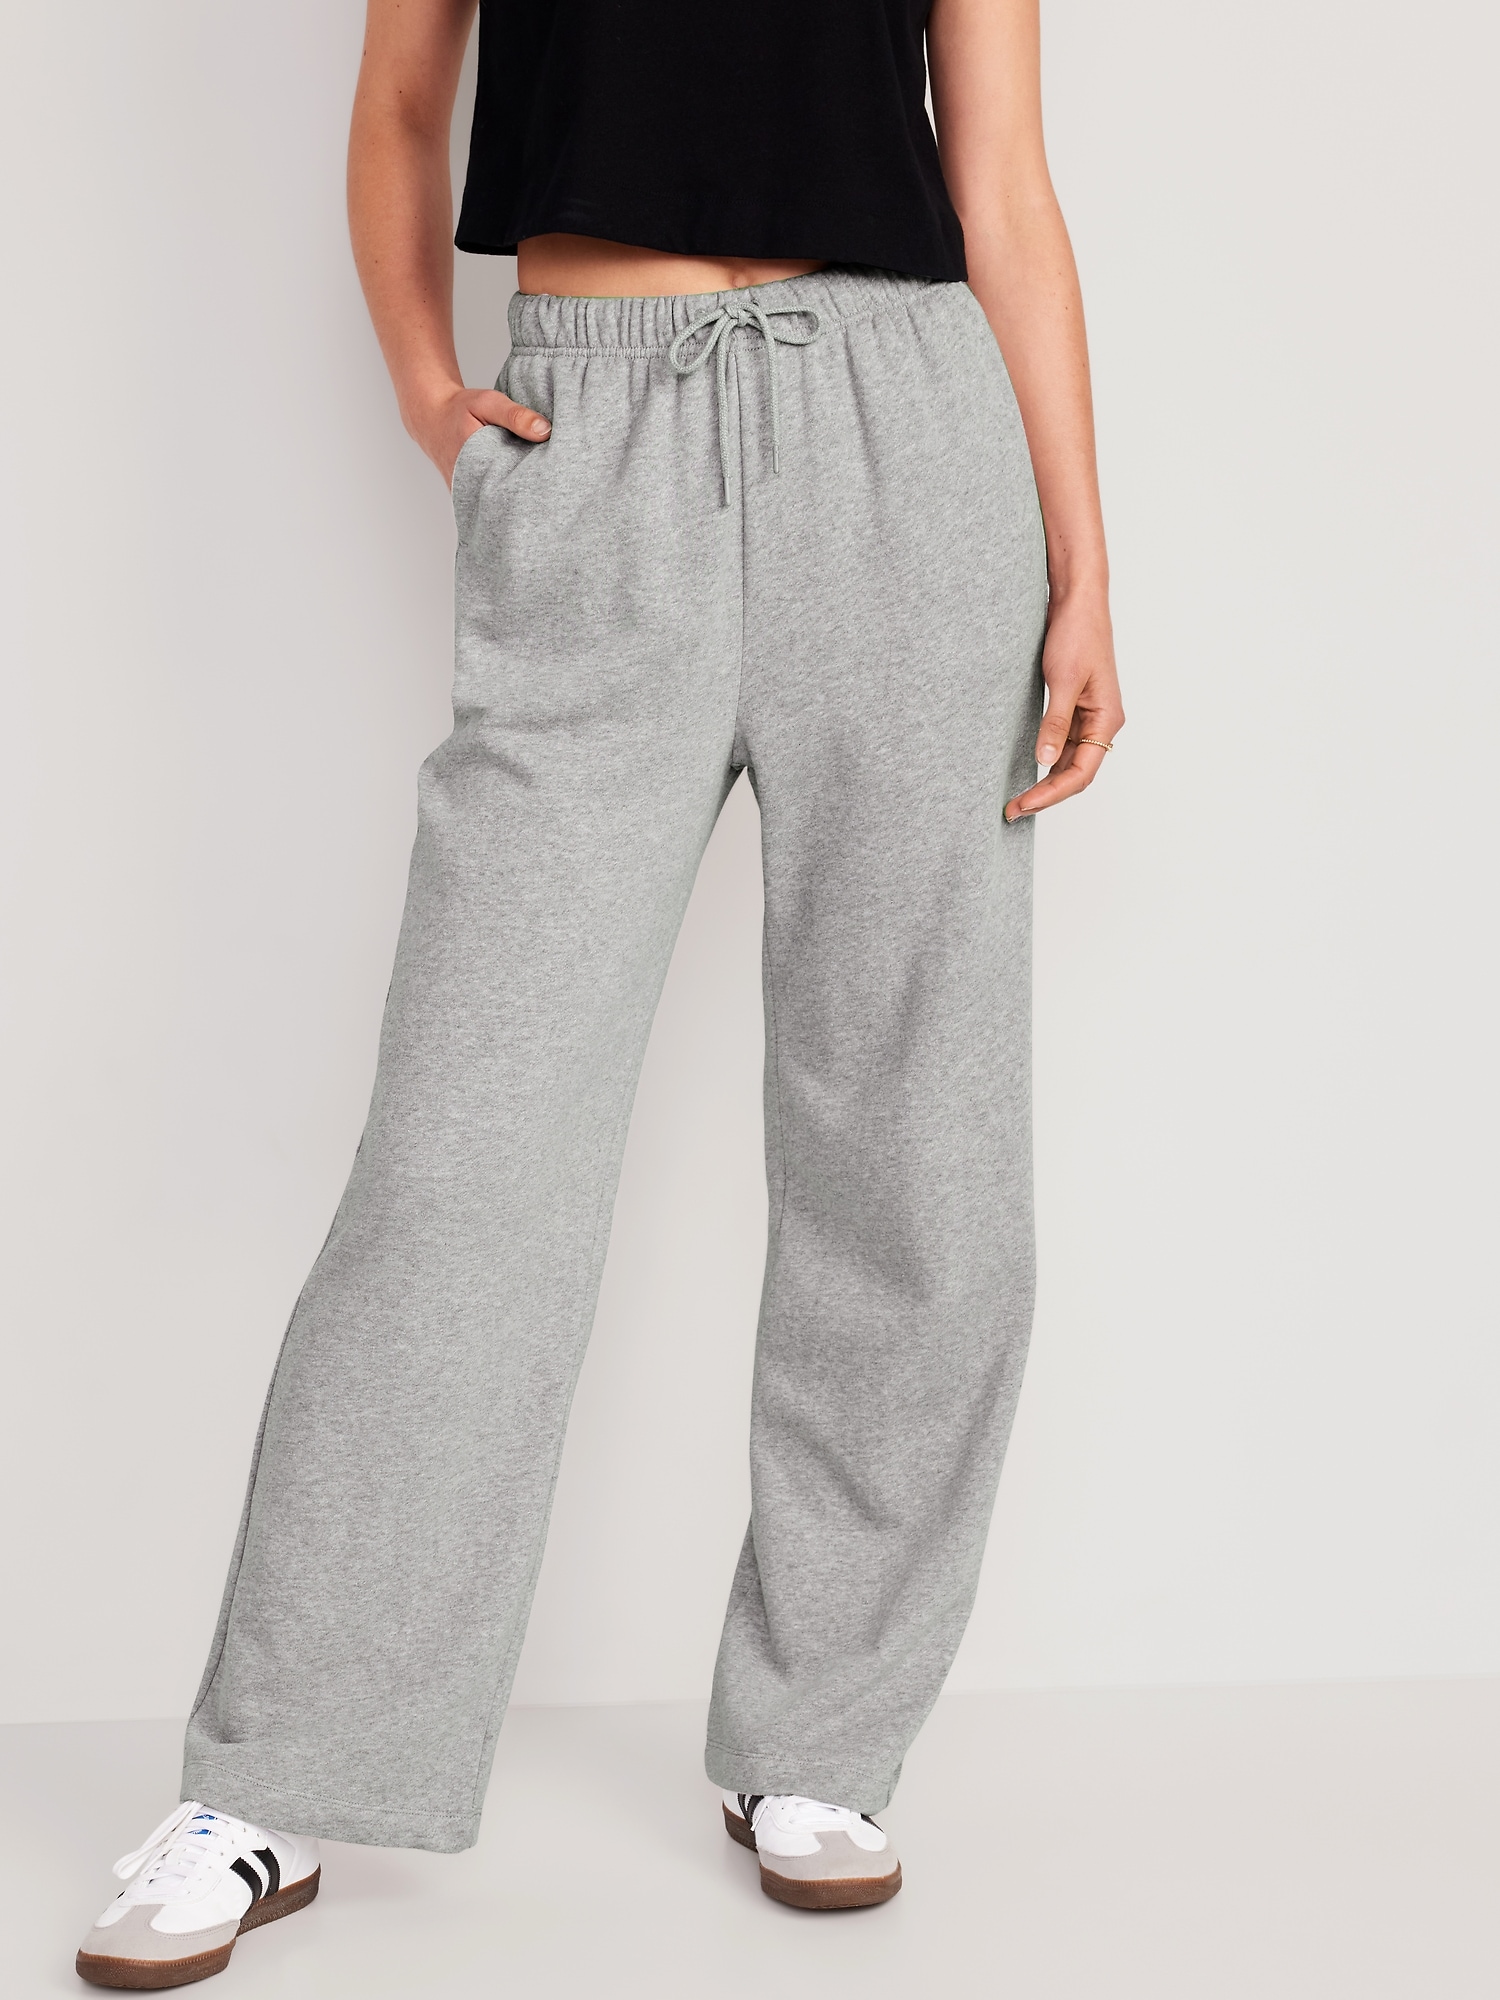 Extra High-Waisted Vintage Sweatpants for Women | Old Navy